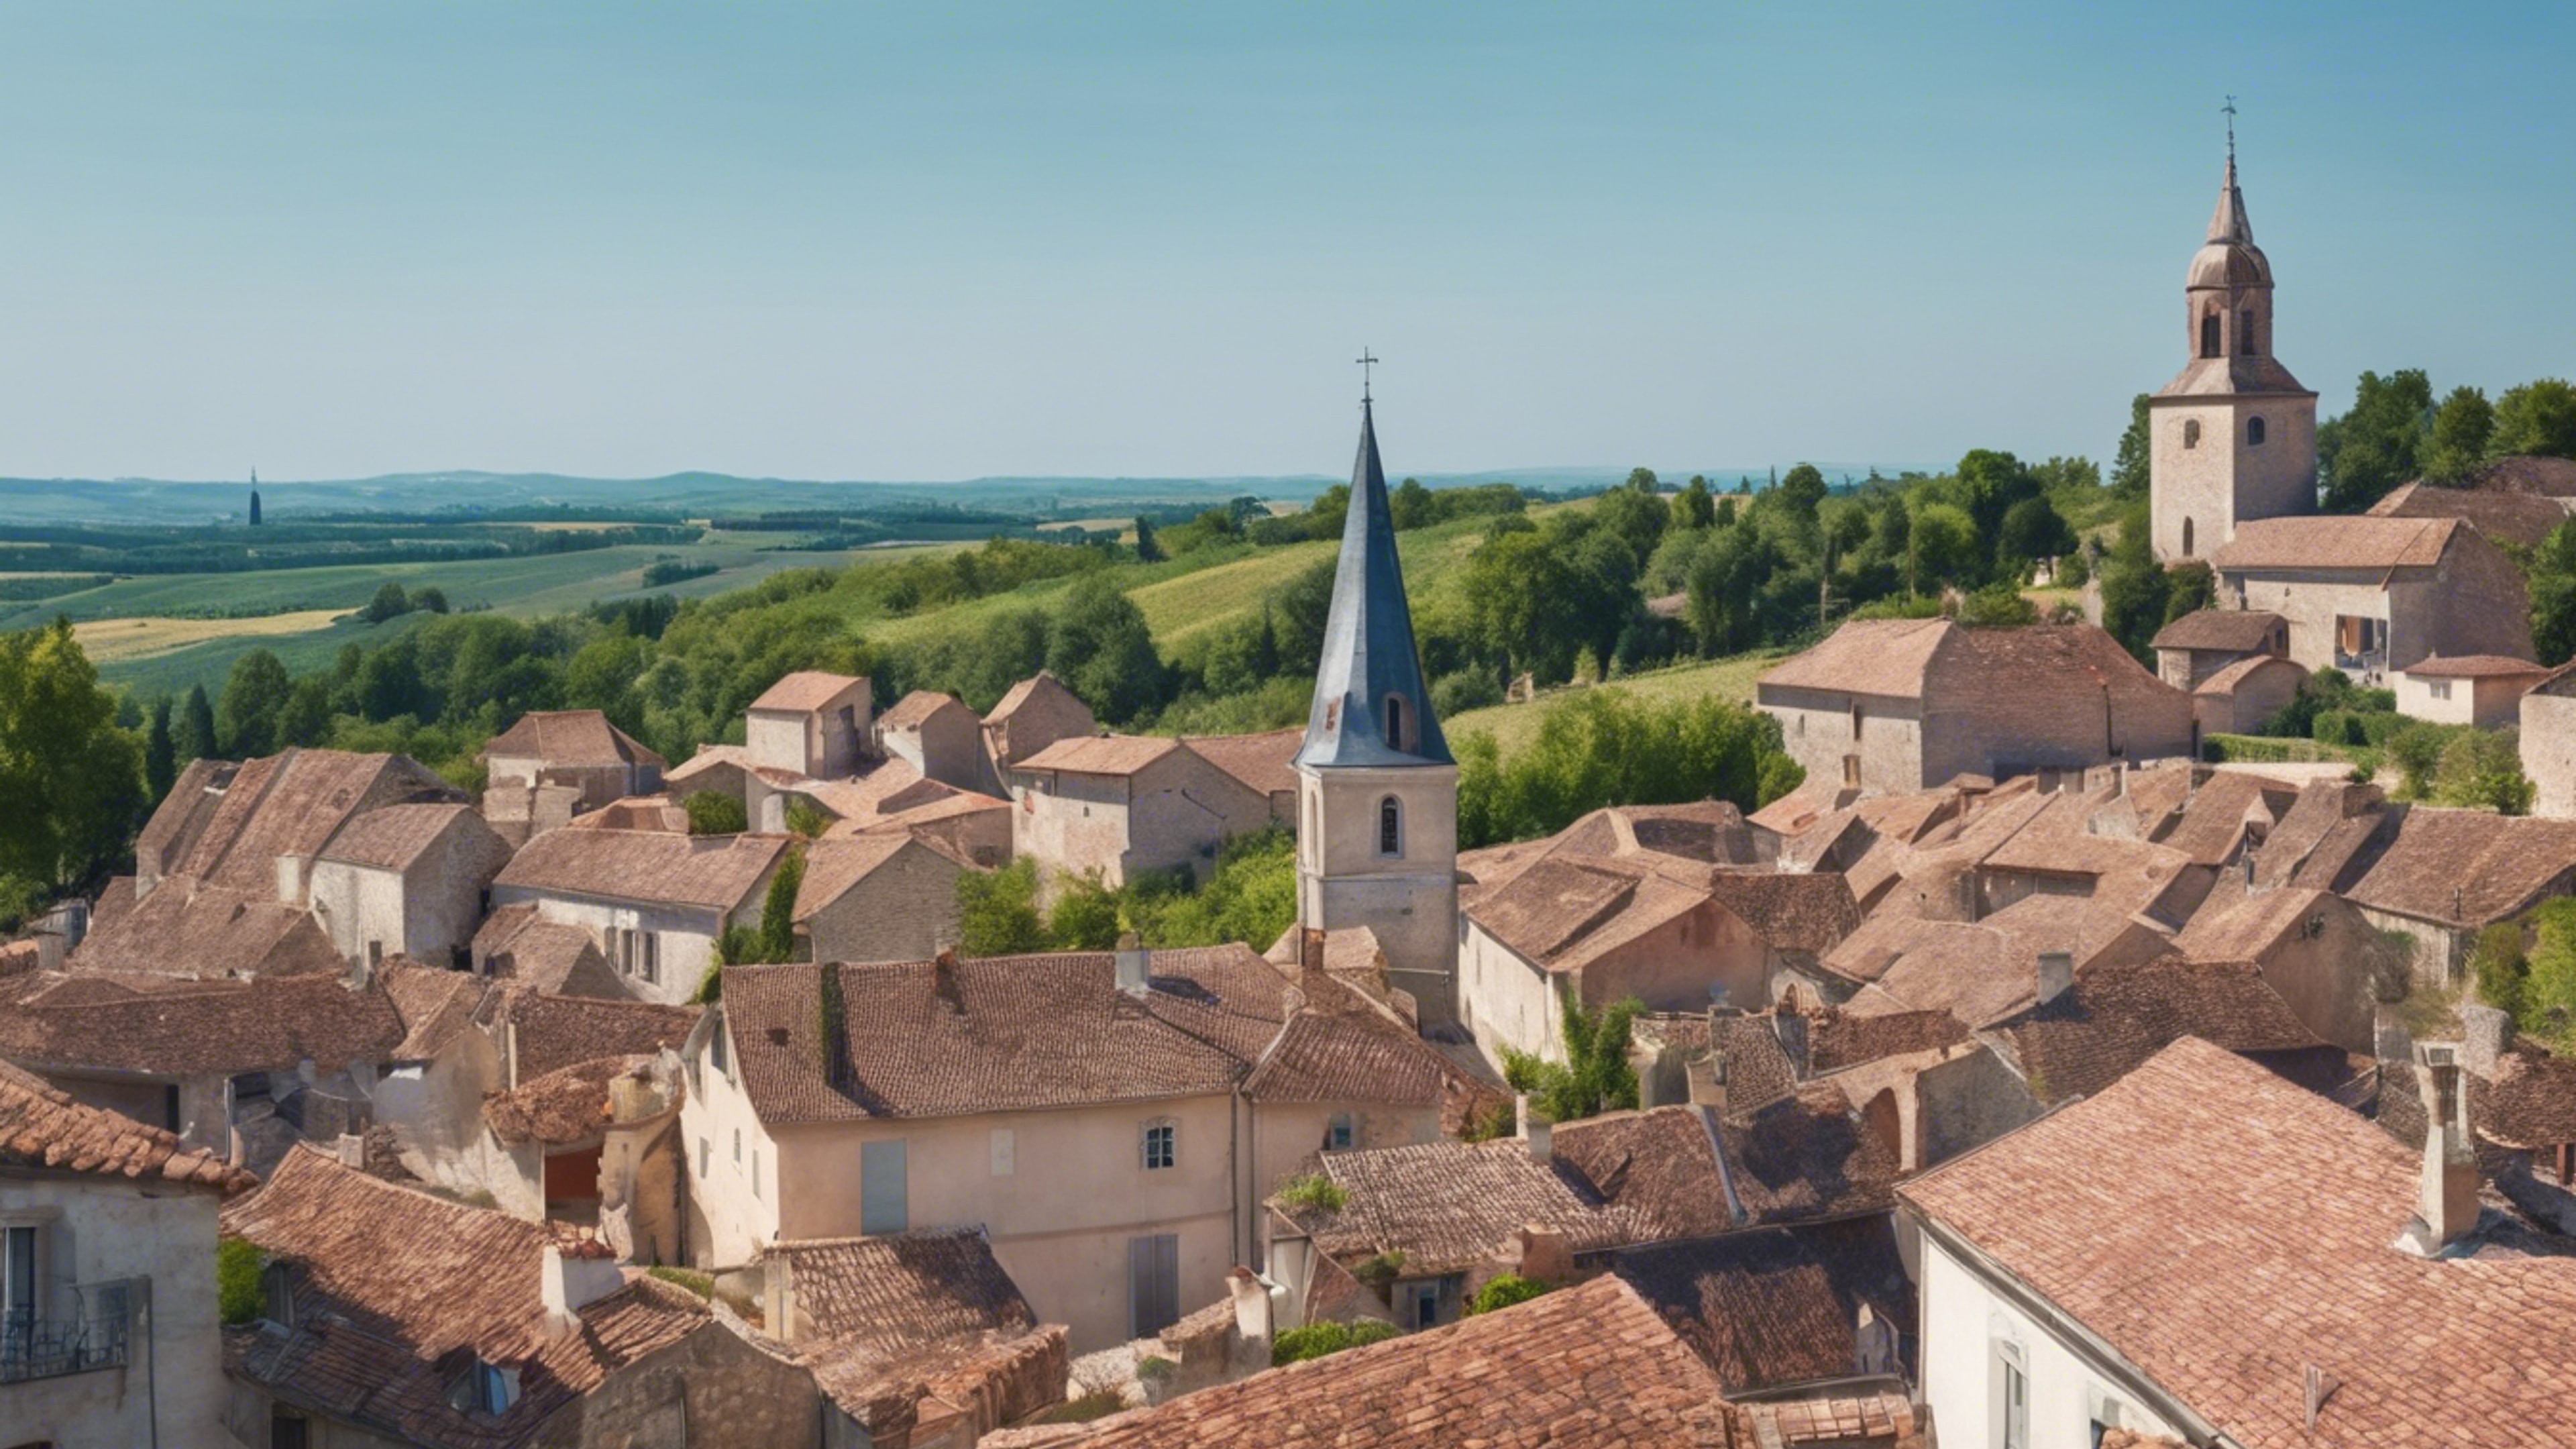 A panoramic view of a French country village with red-tiled roofs, a church spire, and surrounding vineyards under a clear blue sky. Sfondo[29c4a00e876546cab0f2]